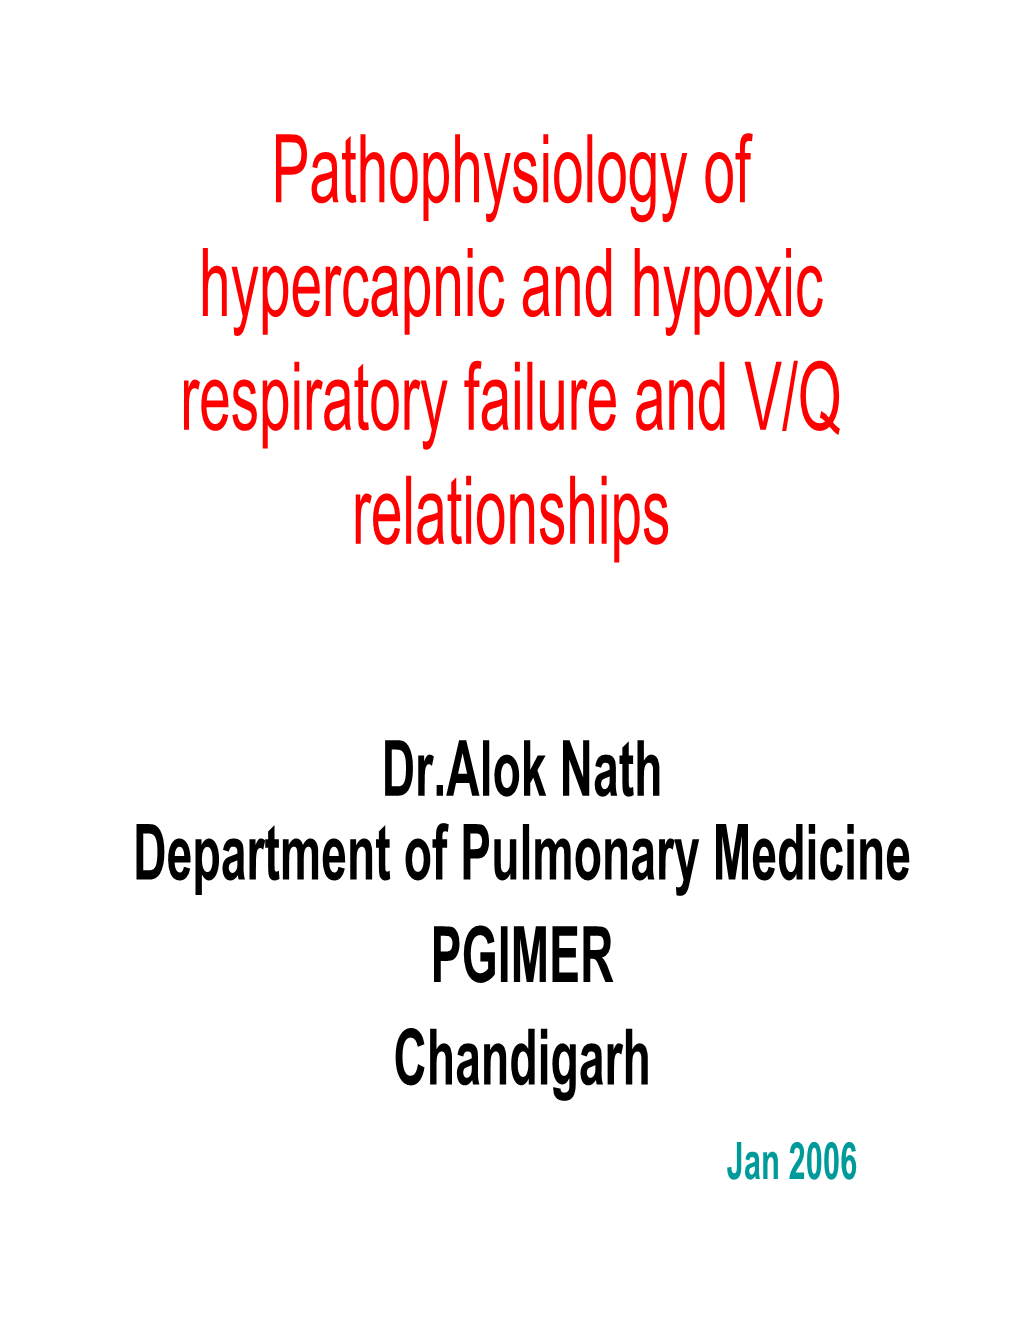 Pathophysiology of Hypercapnic and Hypoxic Respiratory Failure and V/Q Relationships